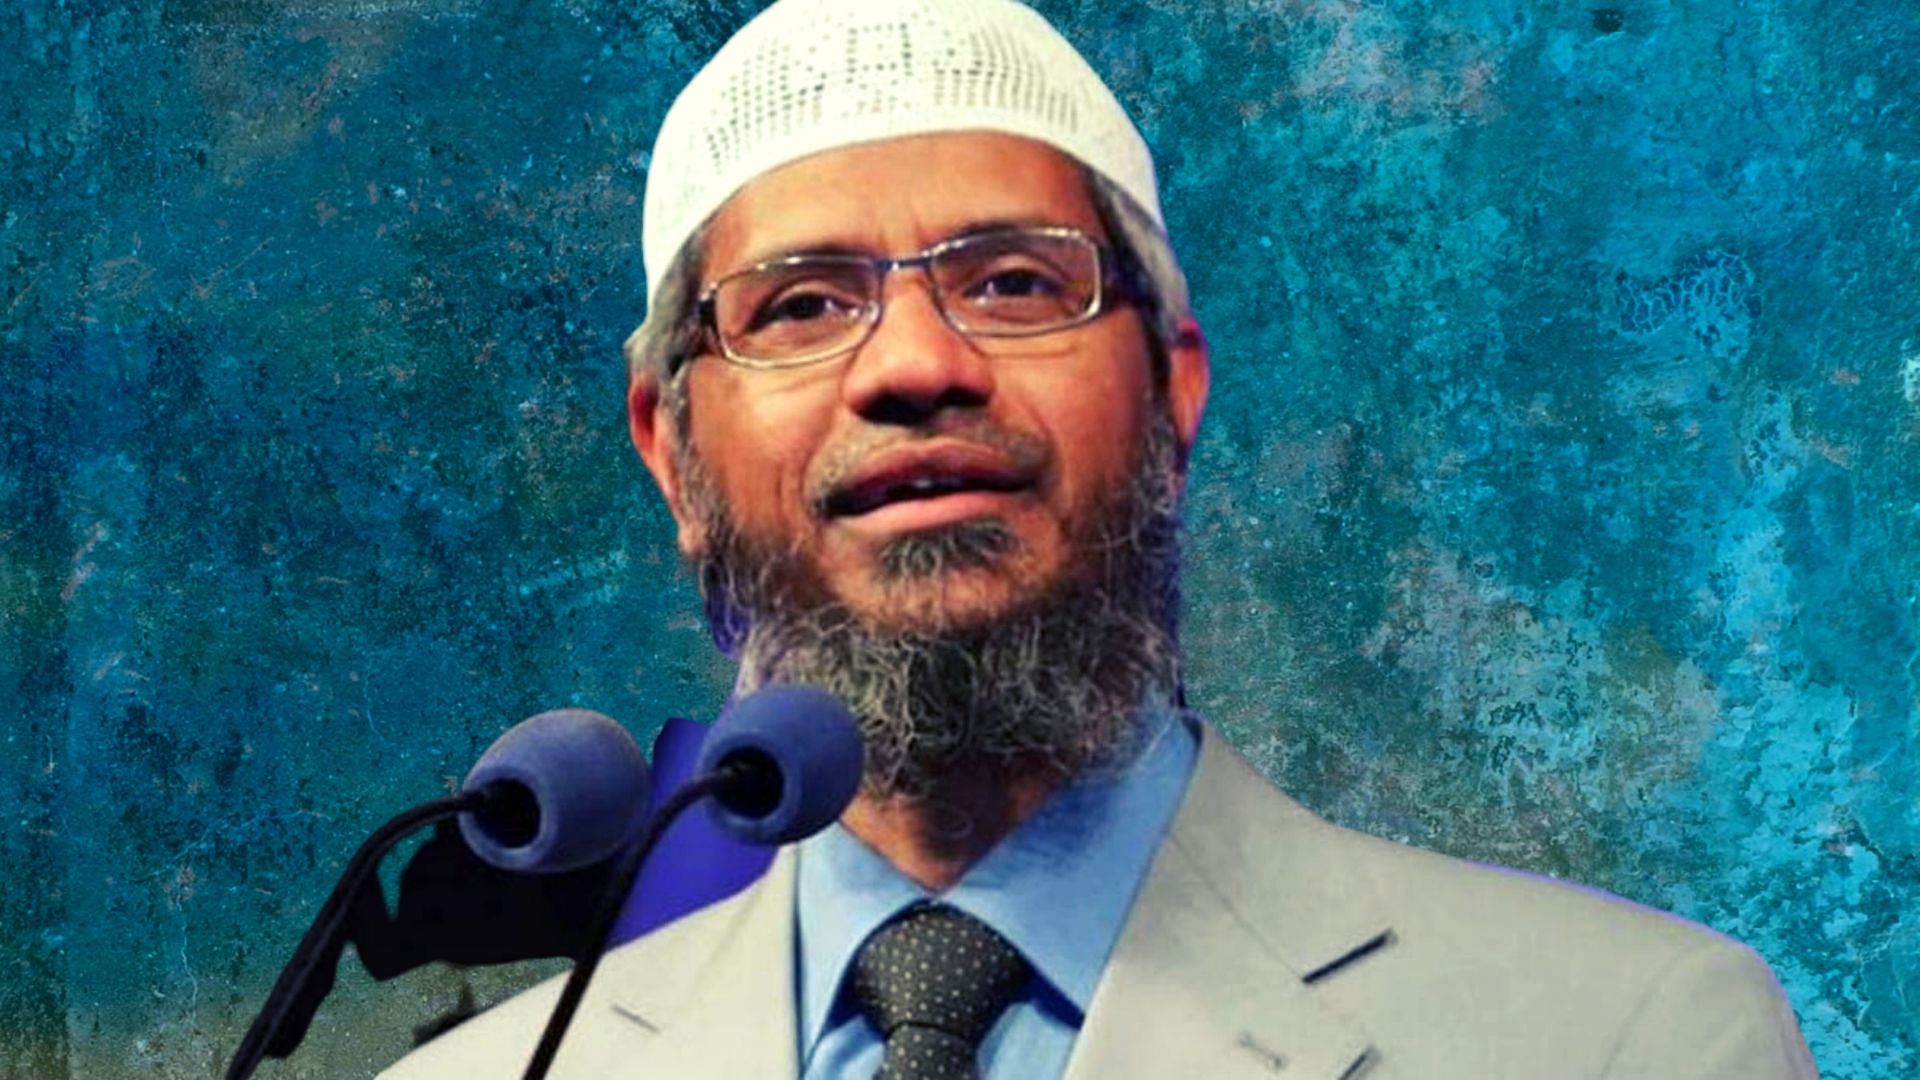 Delhi Police has claimed that Khalid Saifi, one of the accused in the Northeast Delhi violence, met Dr Zakir Naik overseas.